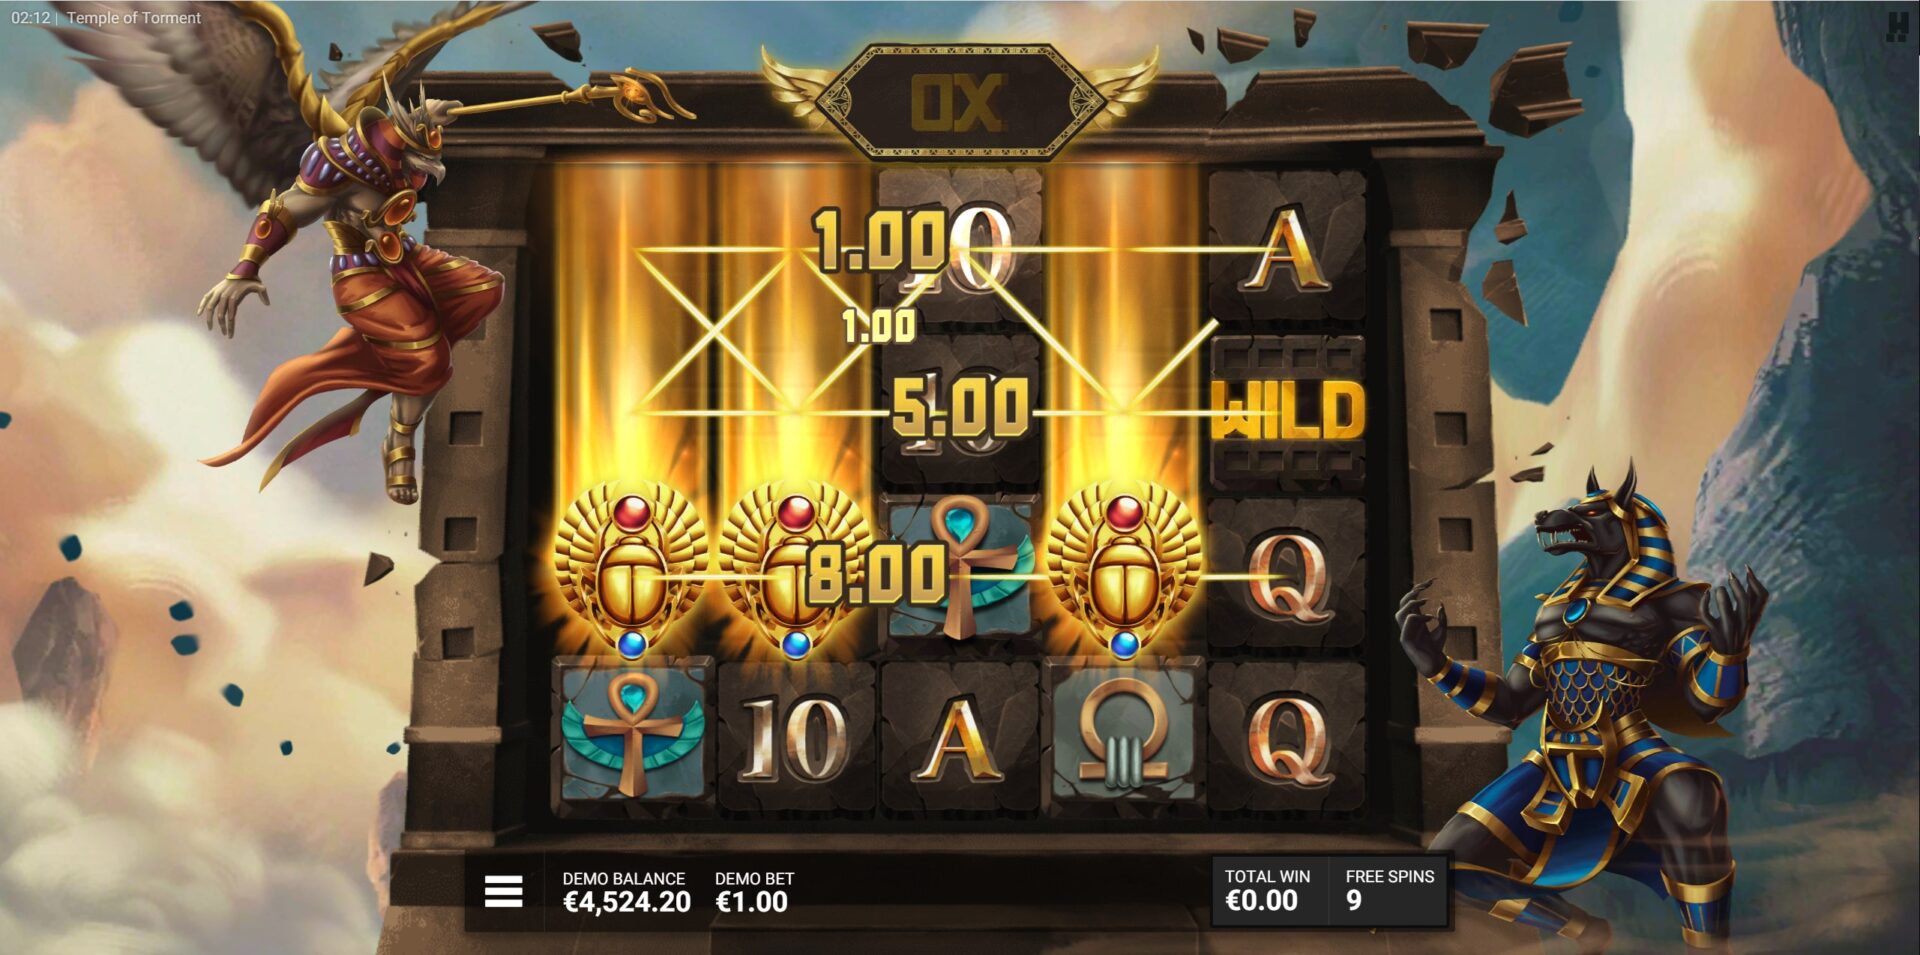 Temple of Torment Slot - Reign of Ra Free Spins